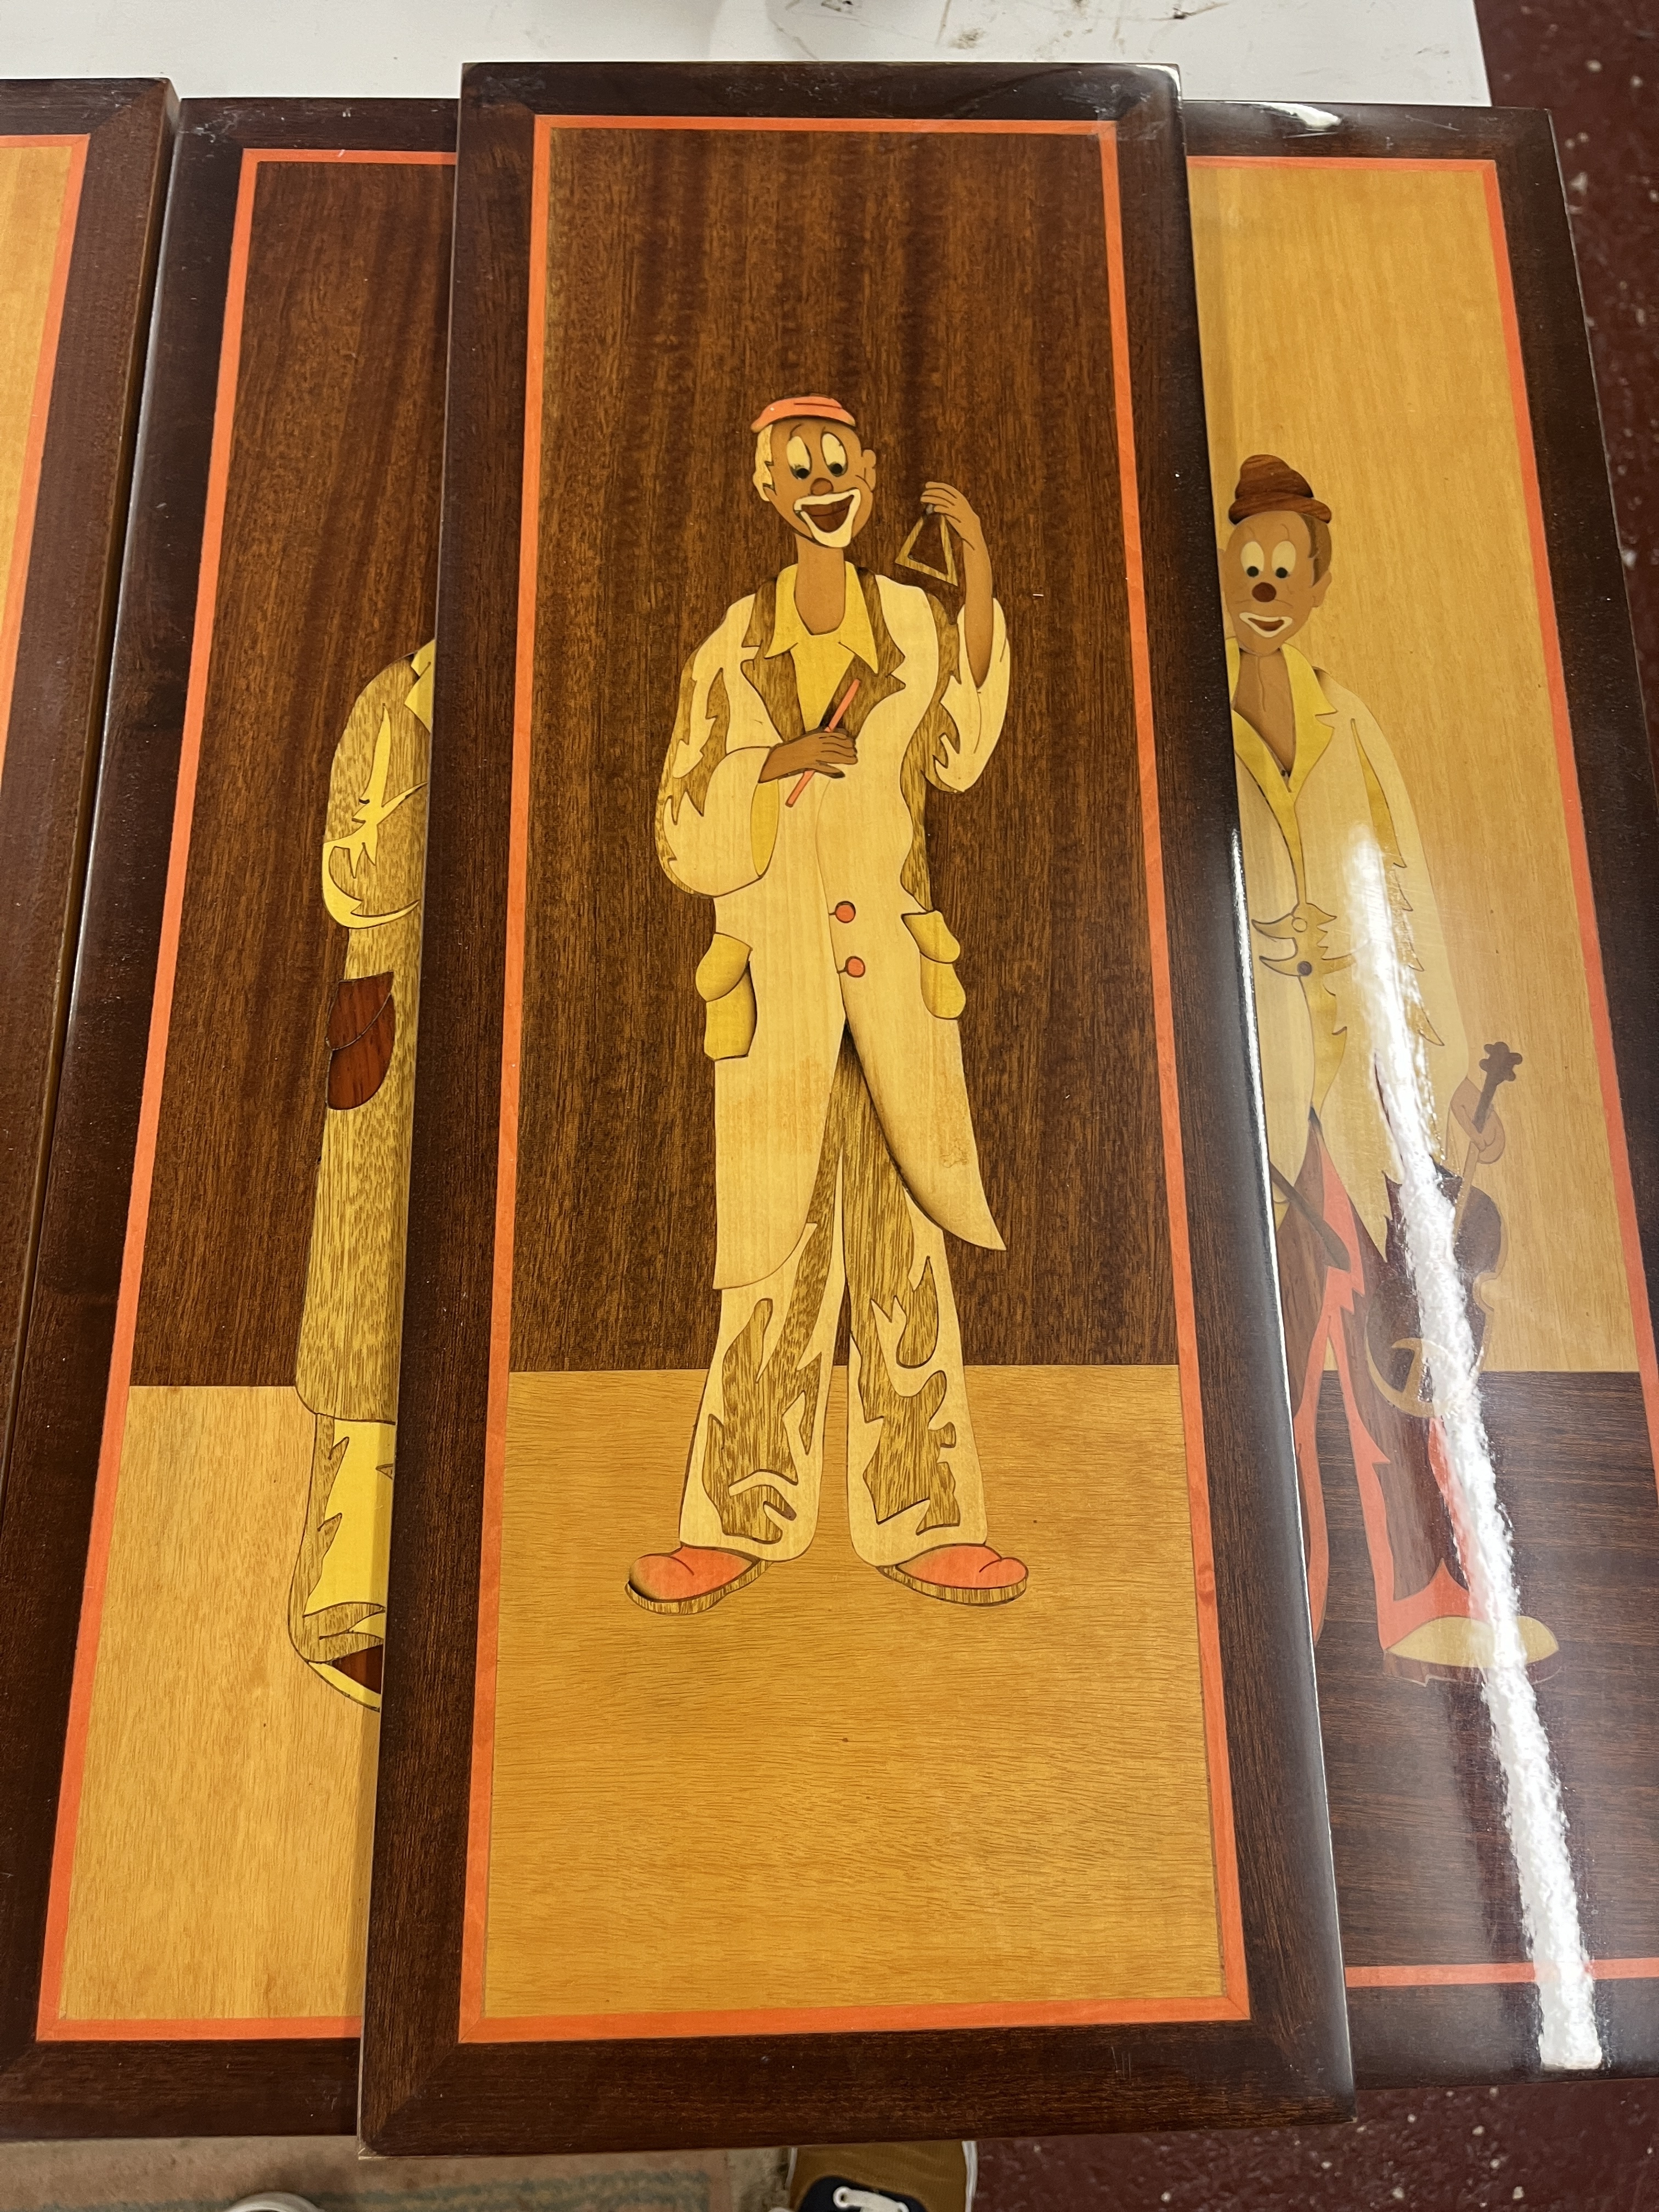 Set of 6 Italian marquetry wooden pictures of clowns - Image 2 of 7